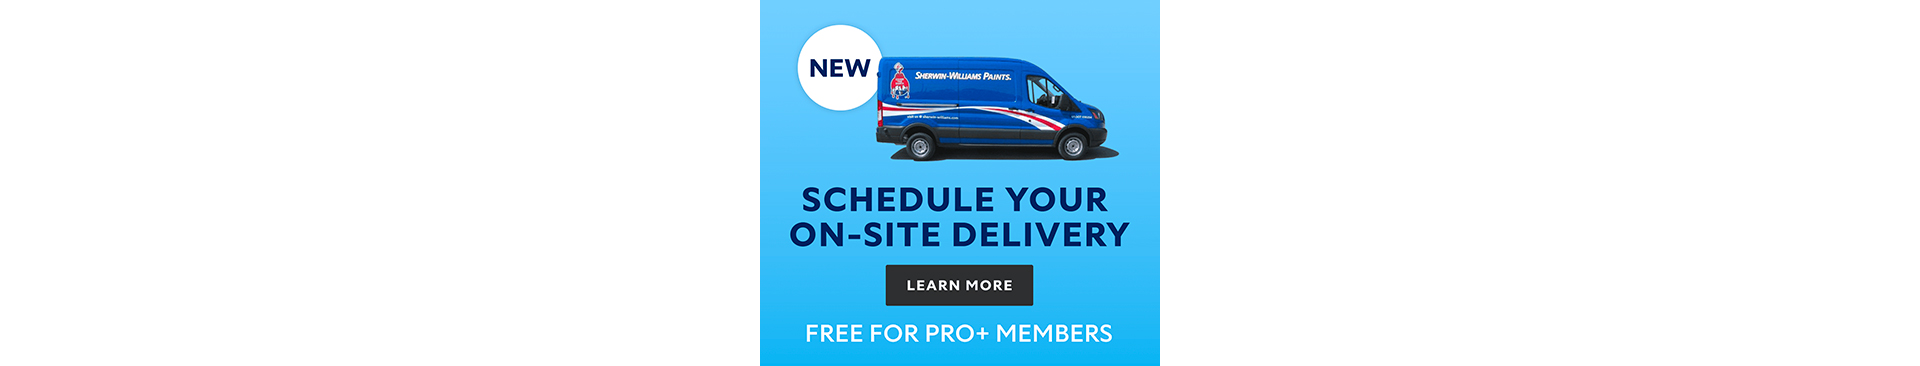 PRO+ Scheduled Delivery graphic of Sherwin-Williams delivery truck with the text "Schedule your on-site delivery. Free for PRO+ members."